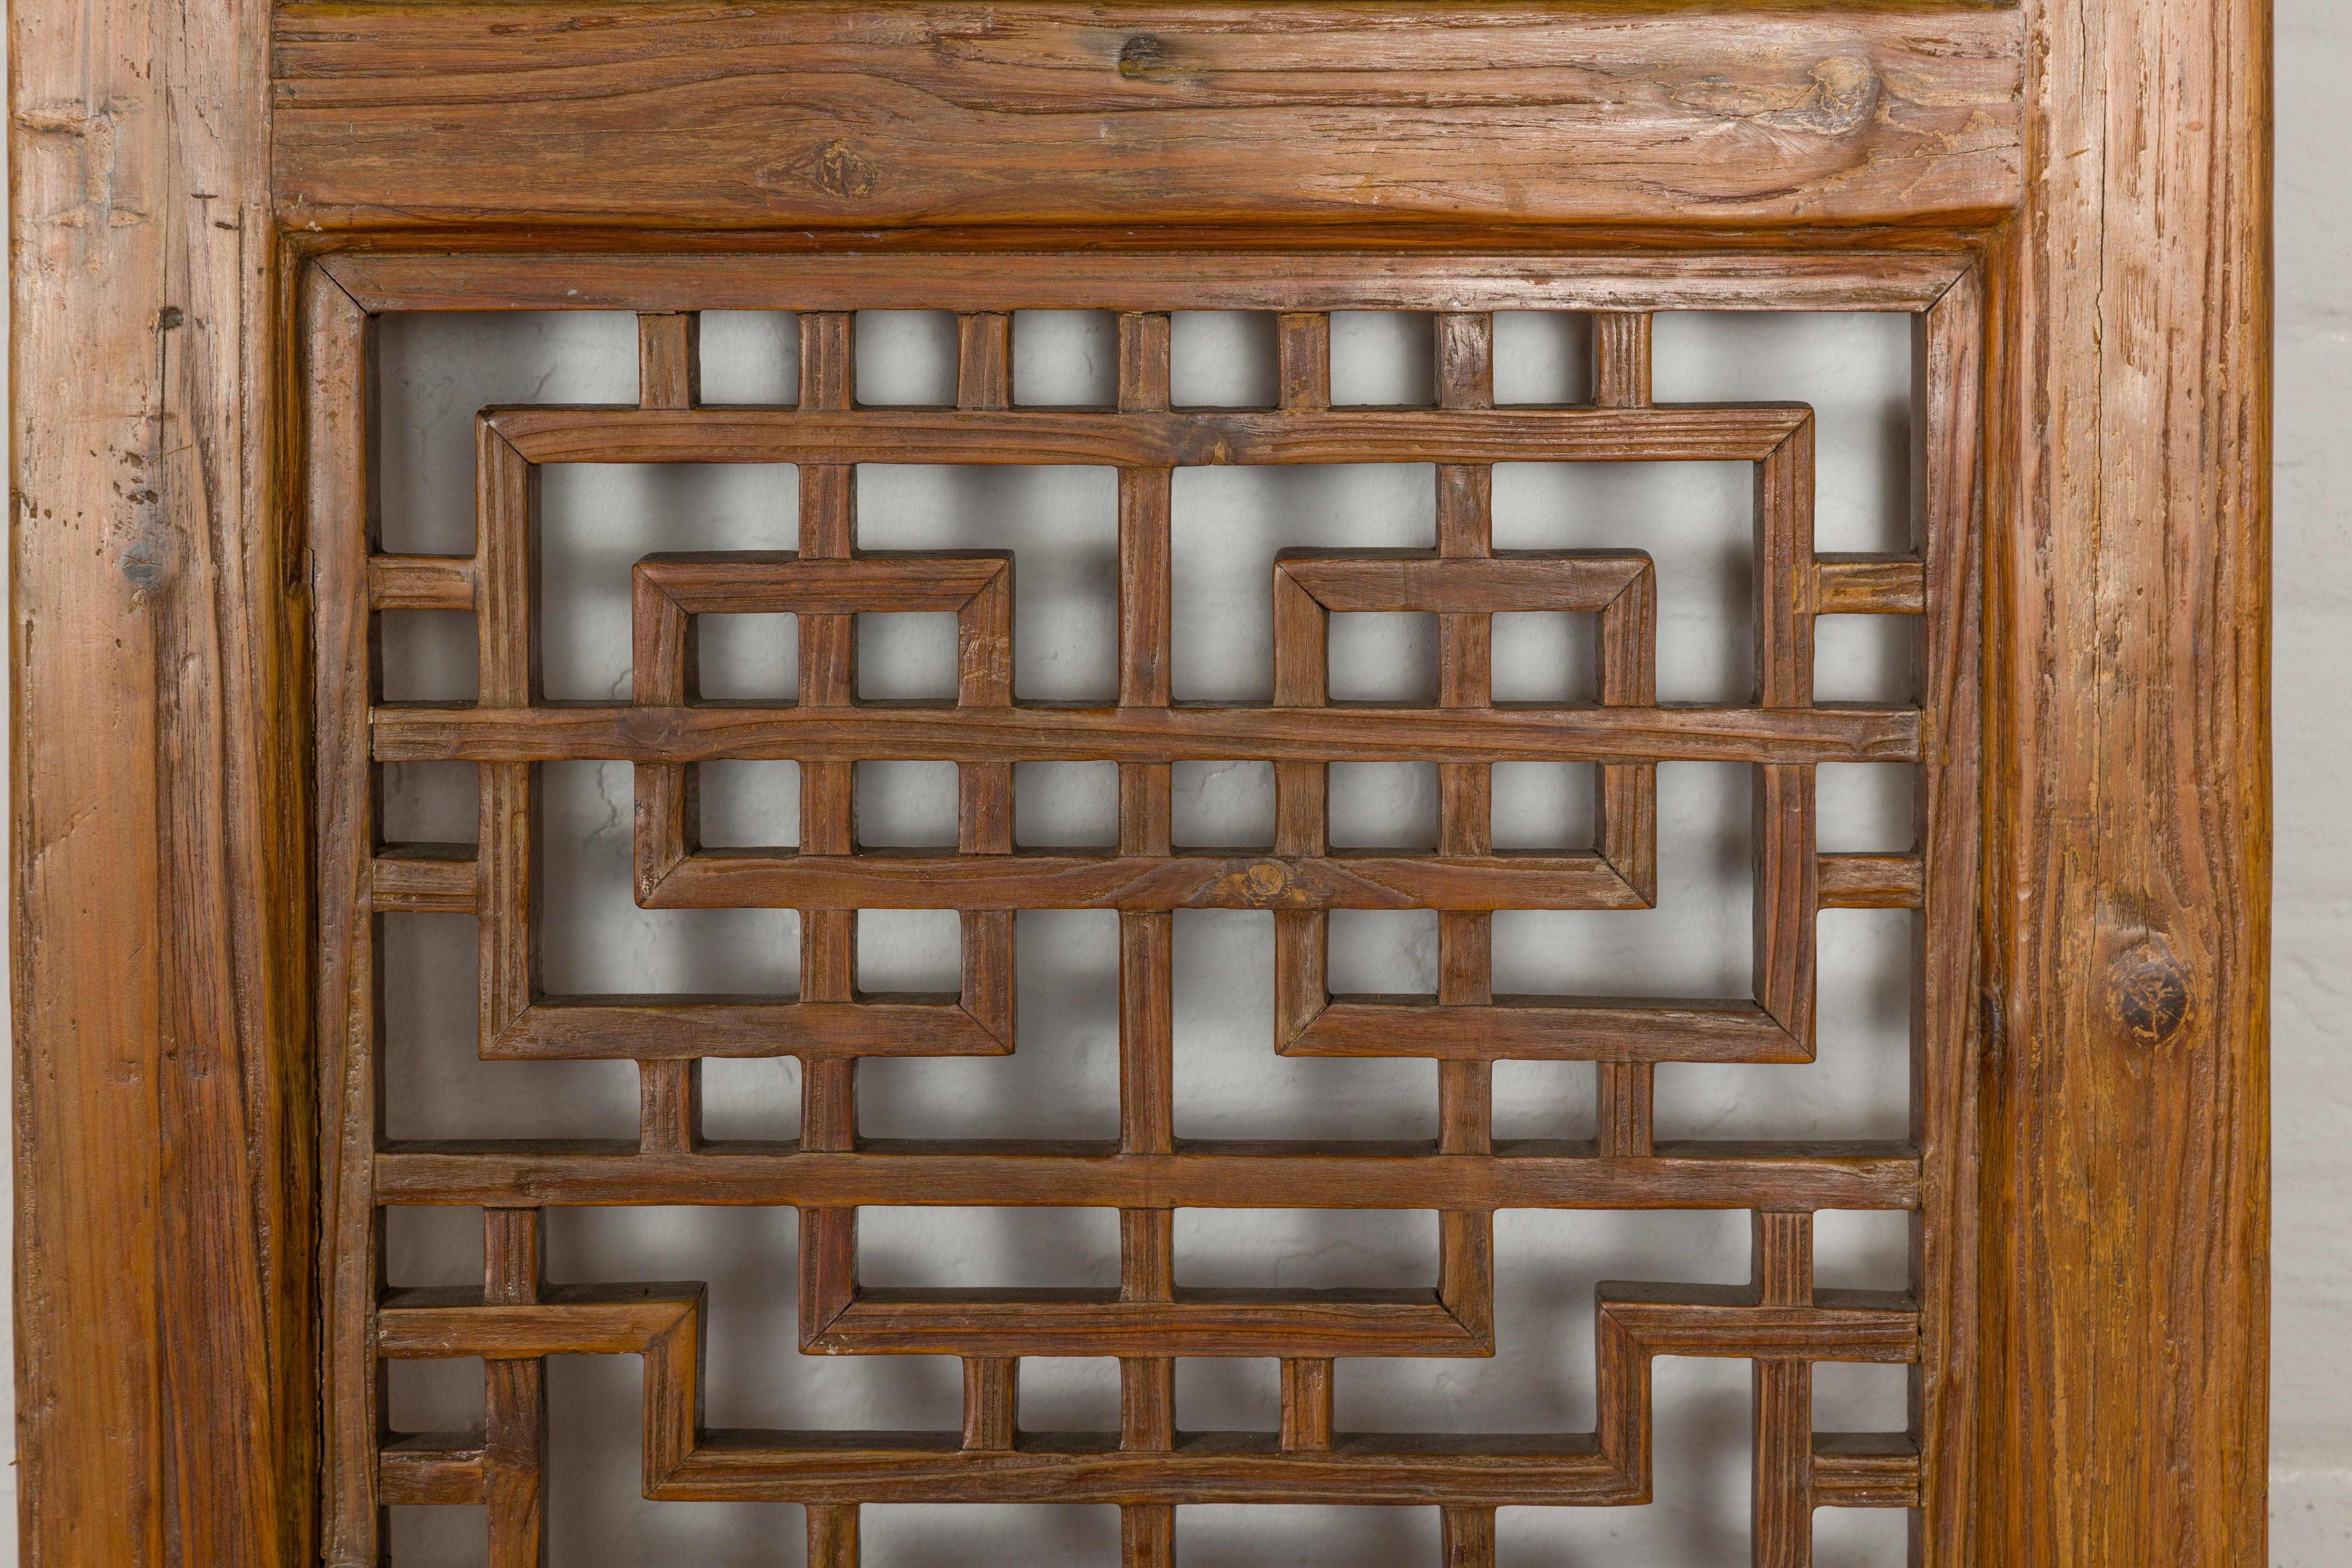 Chinese Qing Dynasty 19th Century Fretwork Screen with Carved Scrolling Motifs For Sale 9